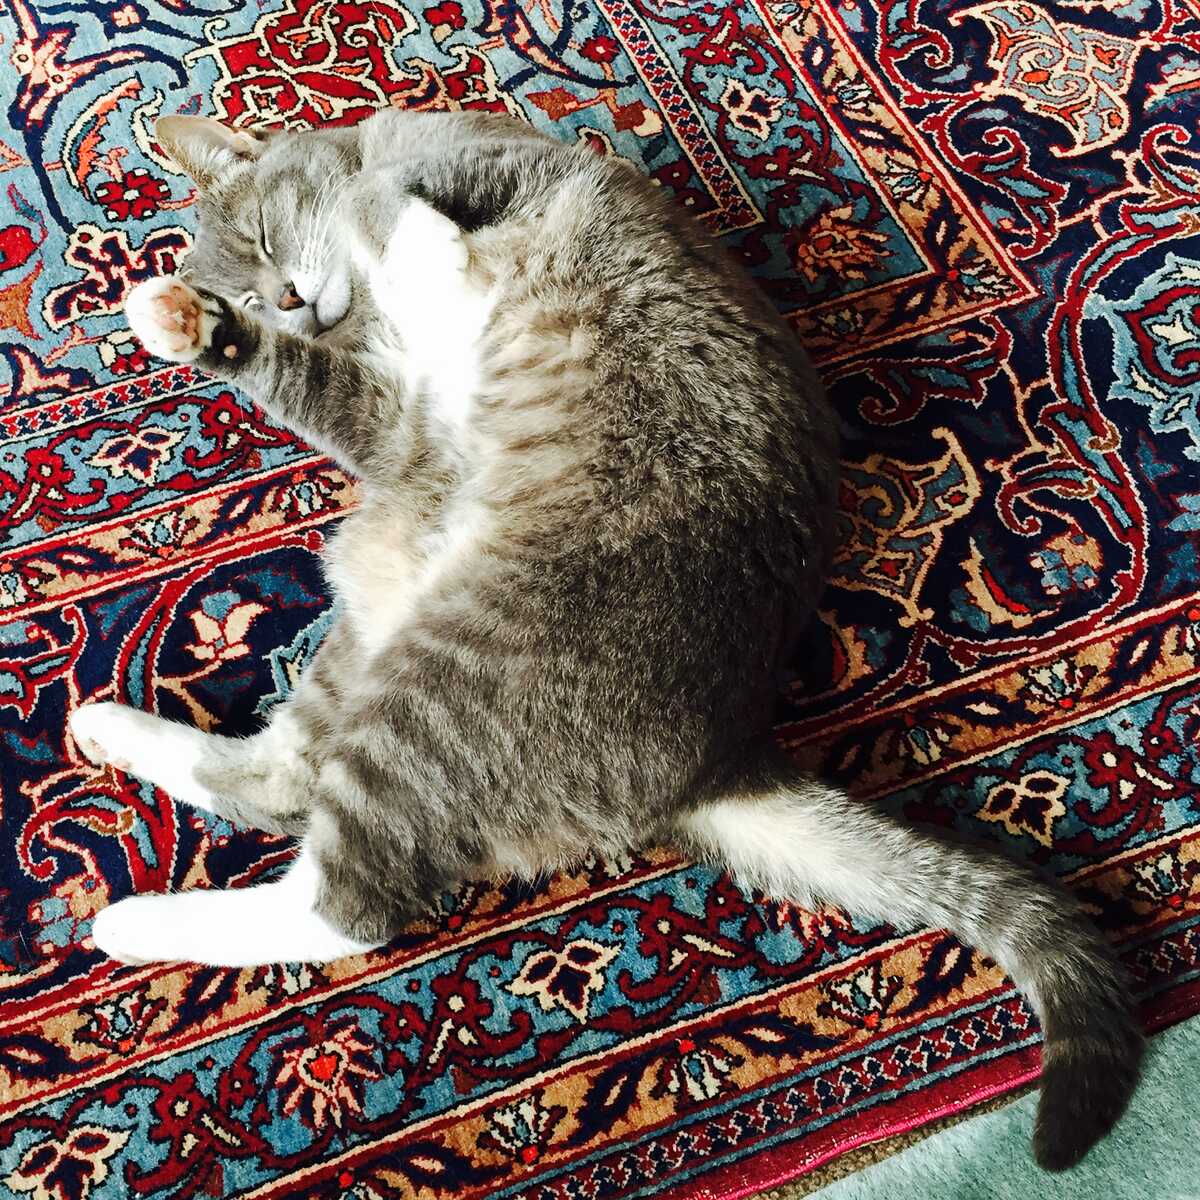 A cat stretching out on an ornamental rug